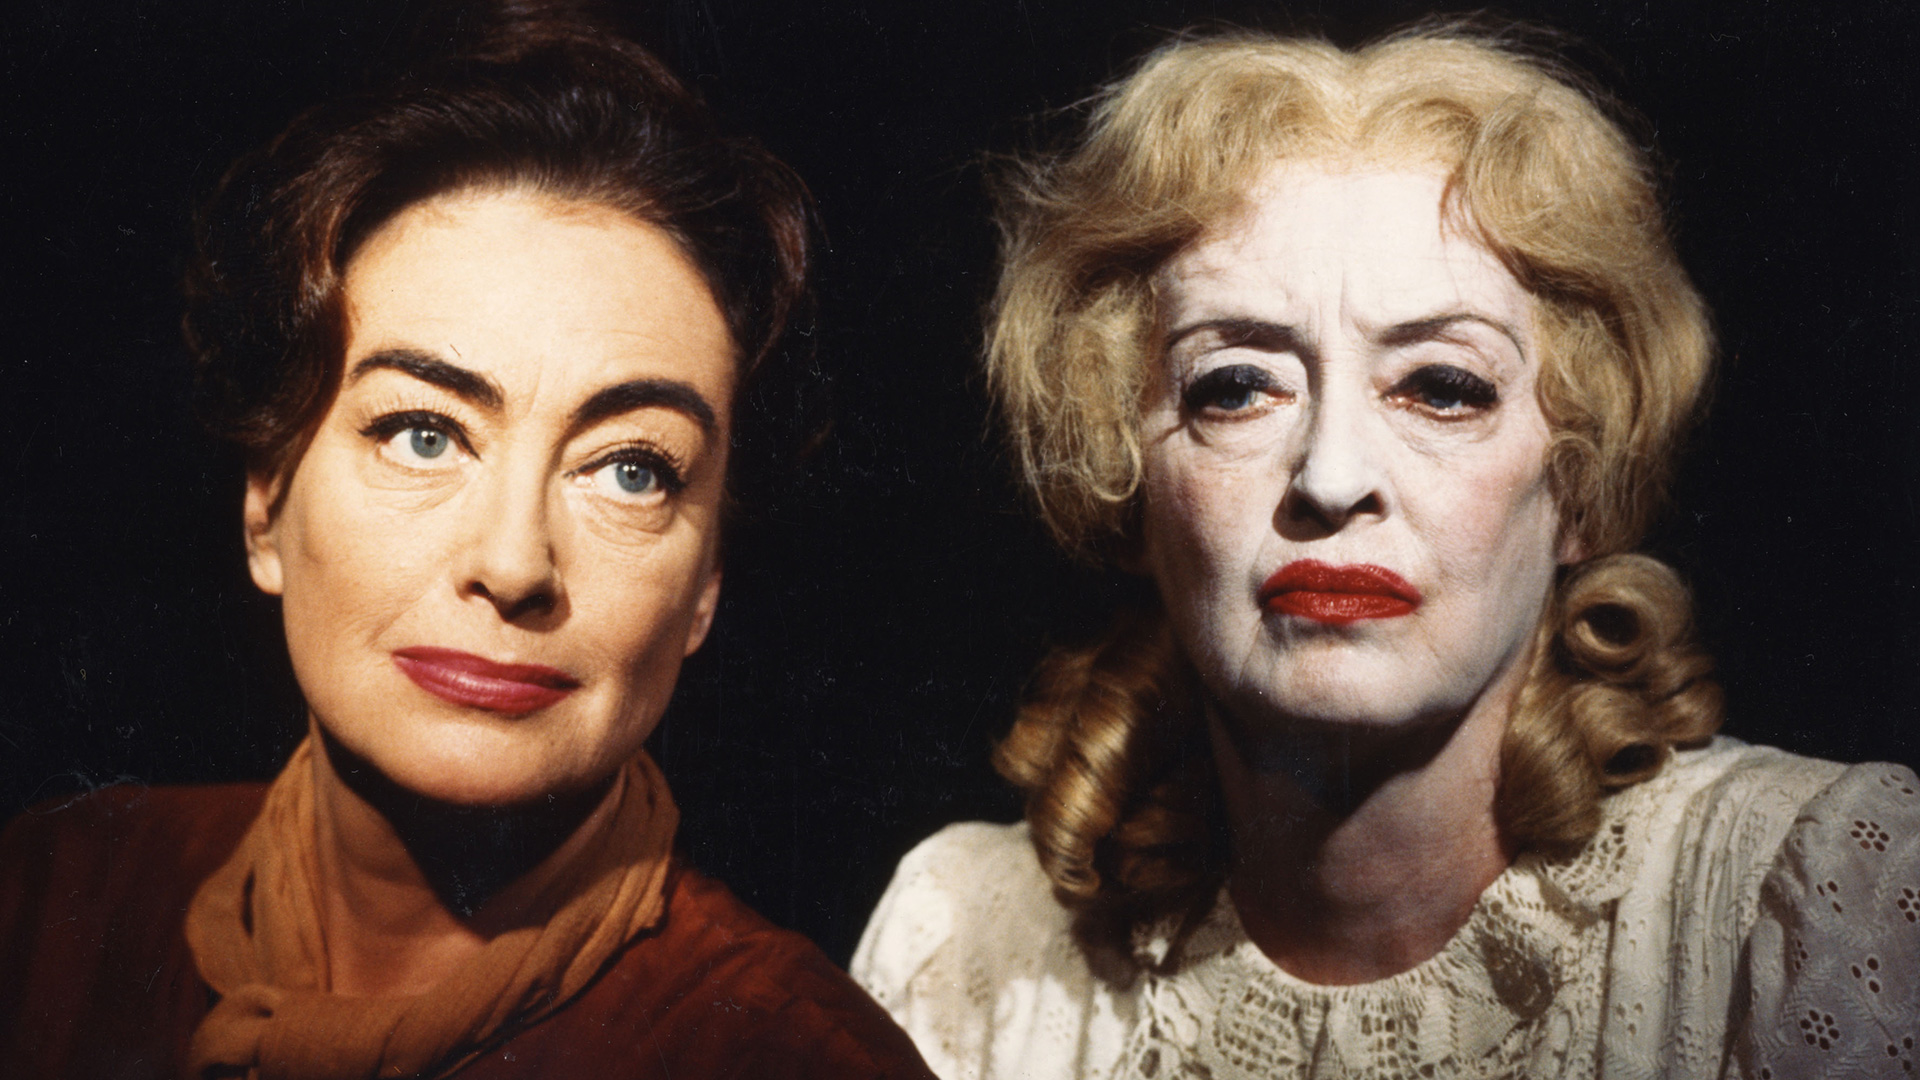 October 31, 1962: “Whatever Happened to Baby Jane?” Starring Bette Davis and Joan Crawford Was Released - Lifetime